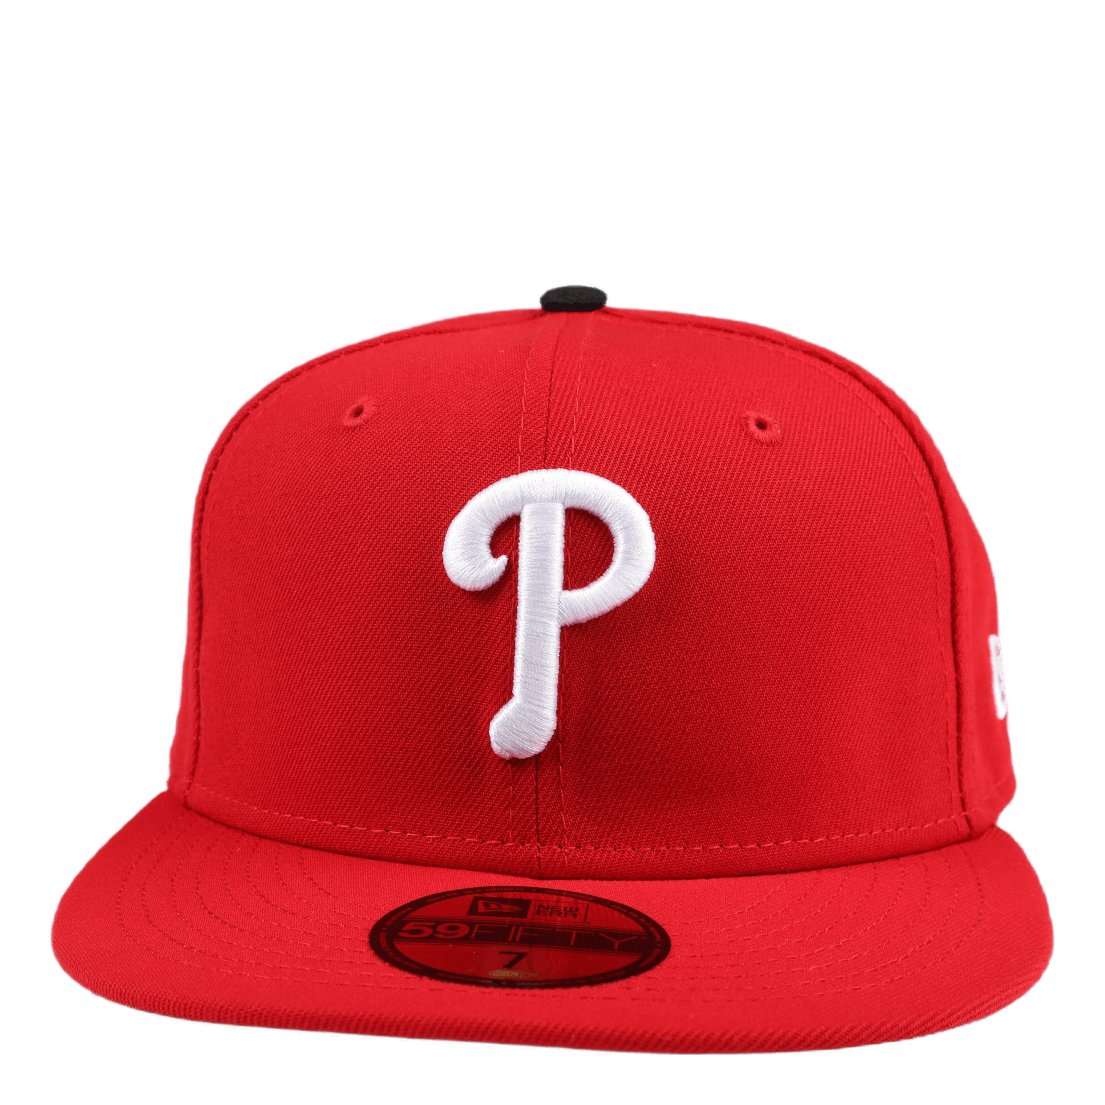 Performance 5950 Phillies Red